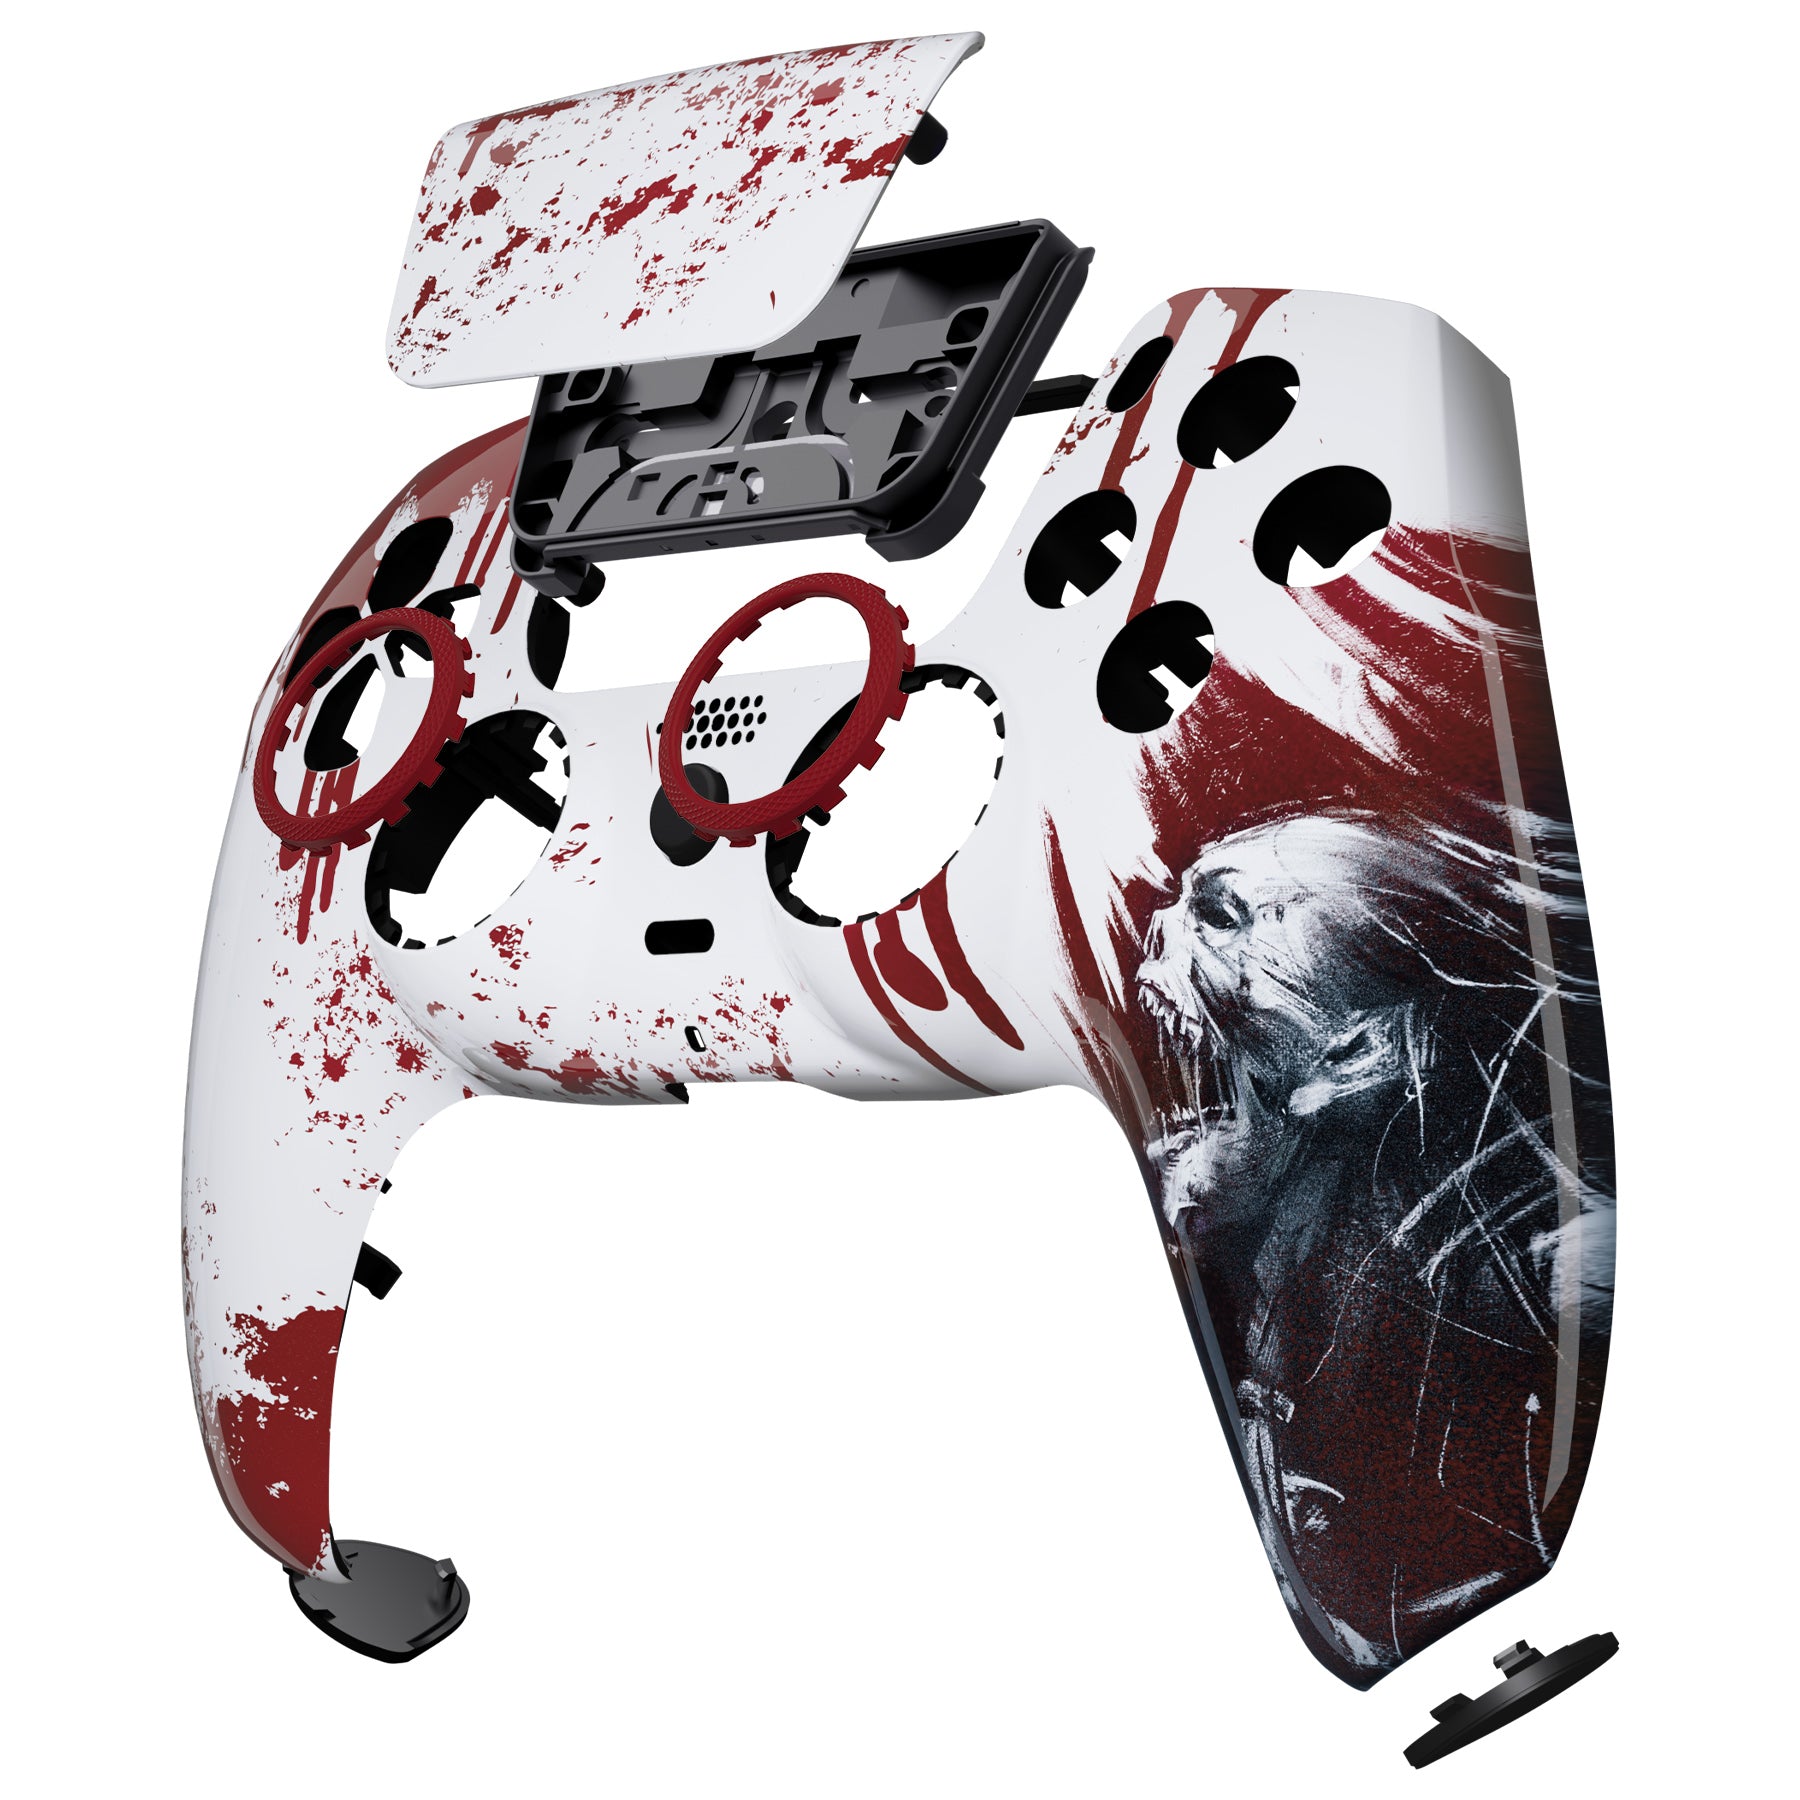 eXtremeRate Retail LUNA Redesigned Blood Zombie Front Shell Touchpad Compatible with ps5 Controller BDM-010 BDM-020 BDM-030, DIY Replacement Housing Custom Touch Pad Cover Compatible with ps5 Controller - GHPFT002